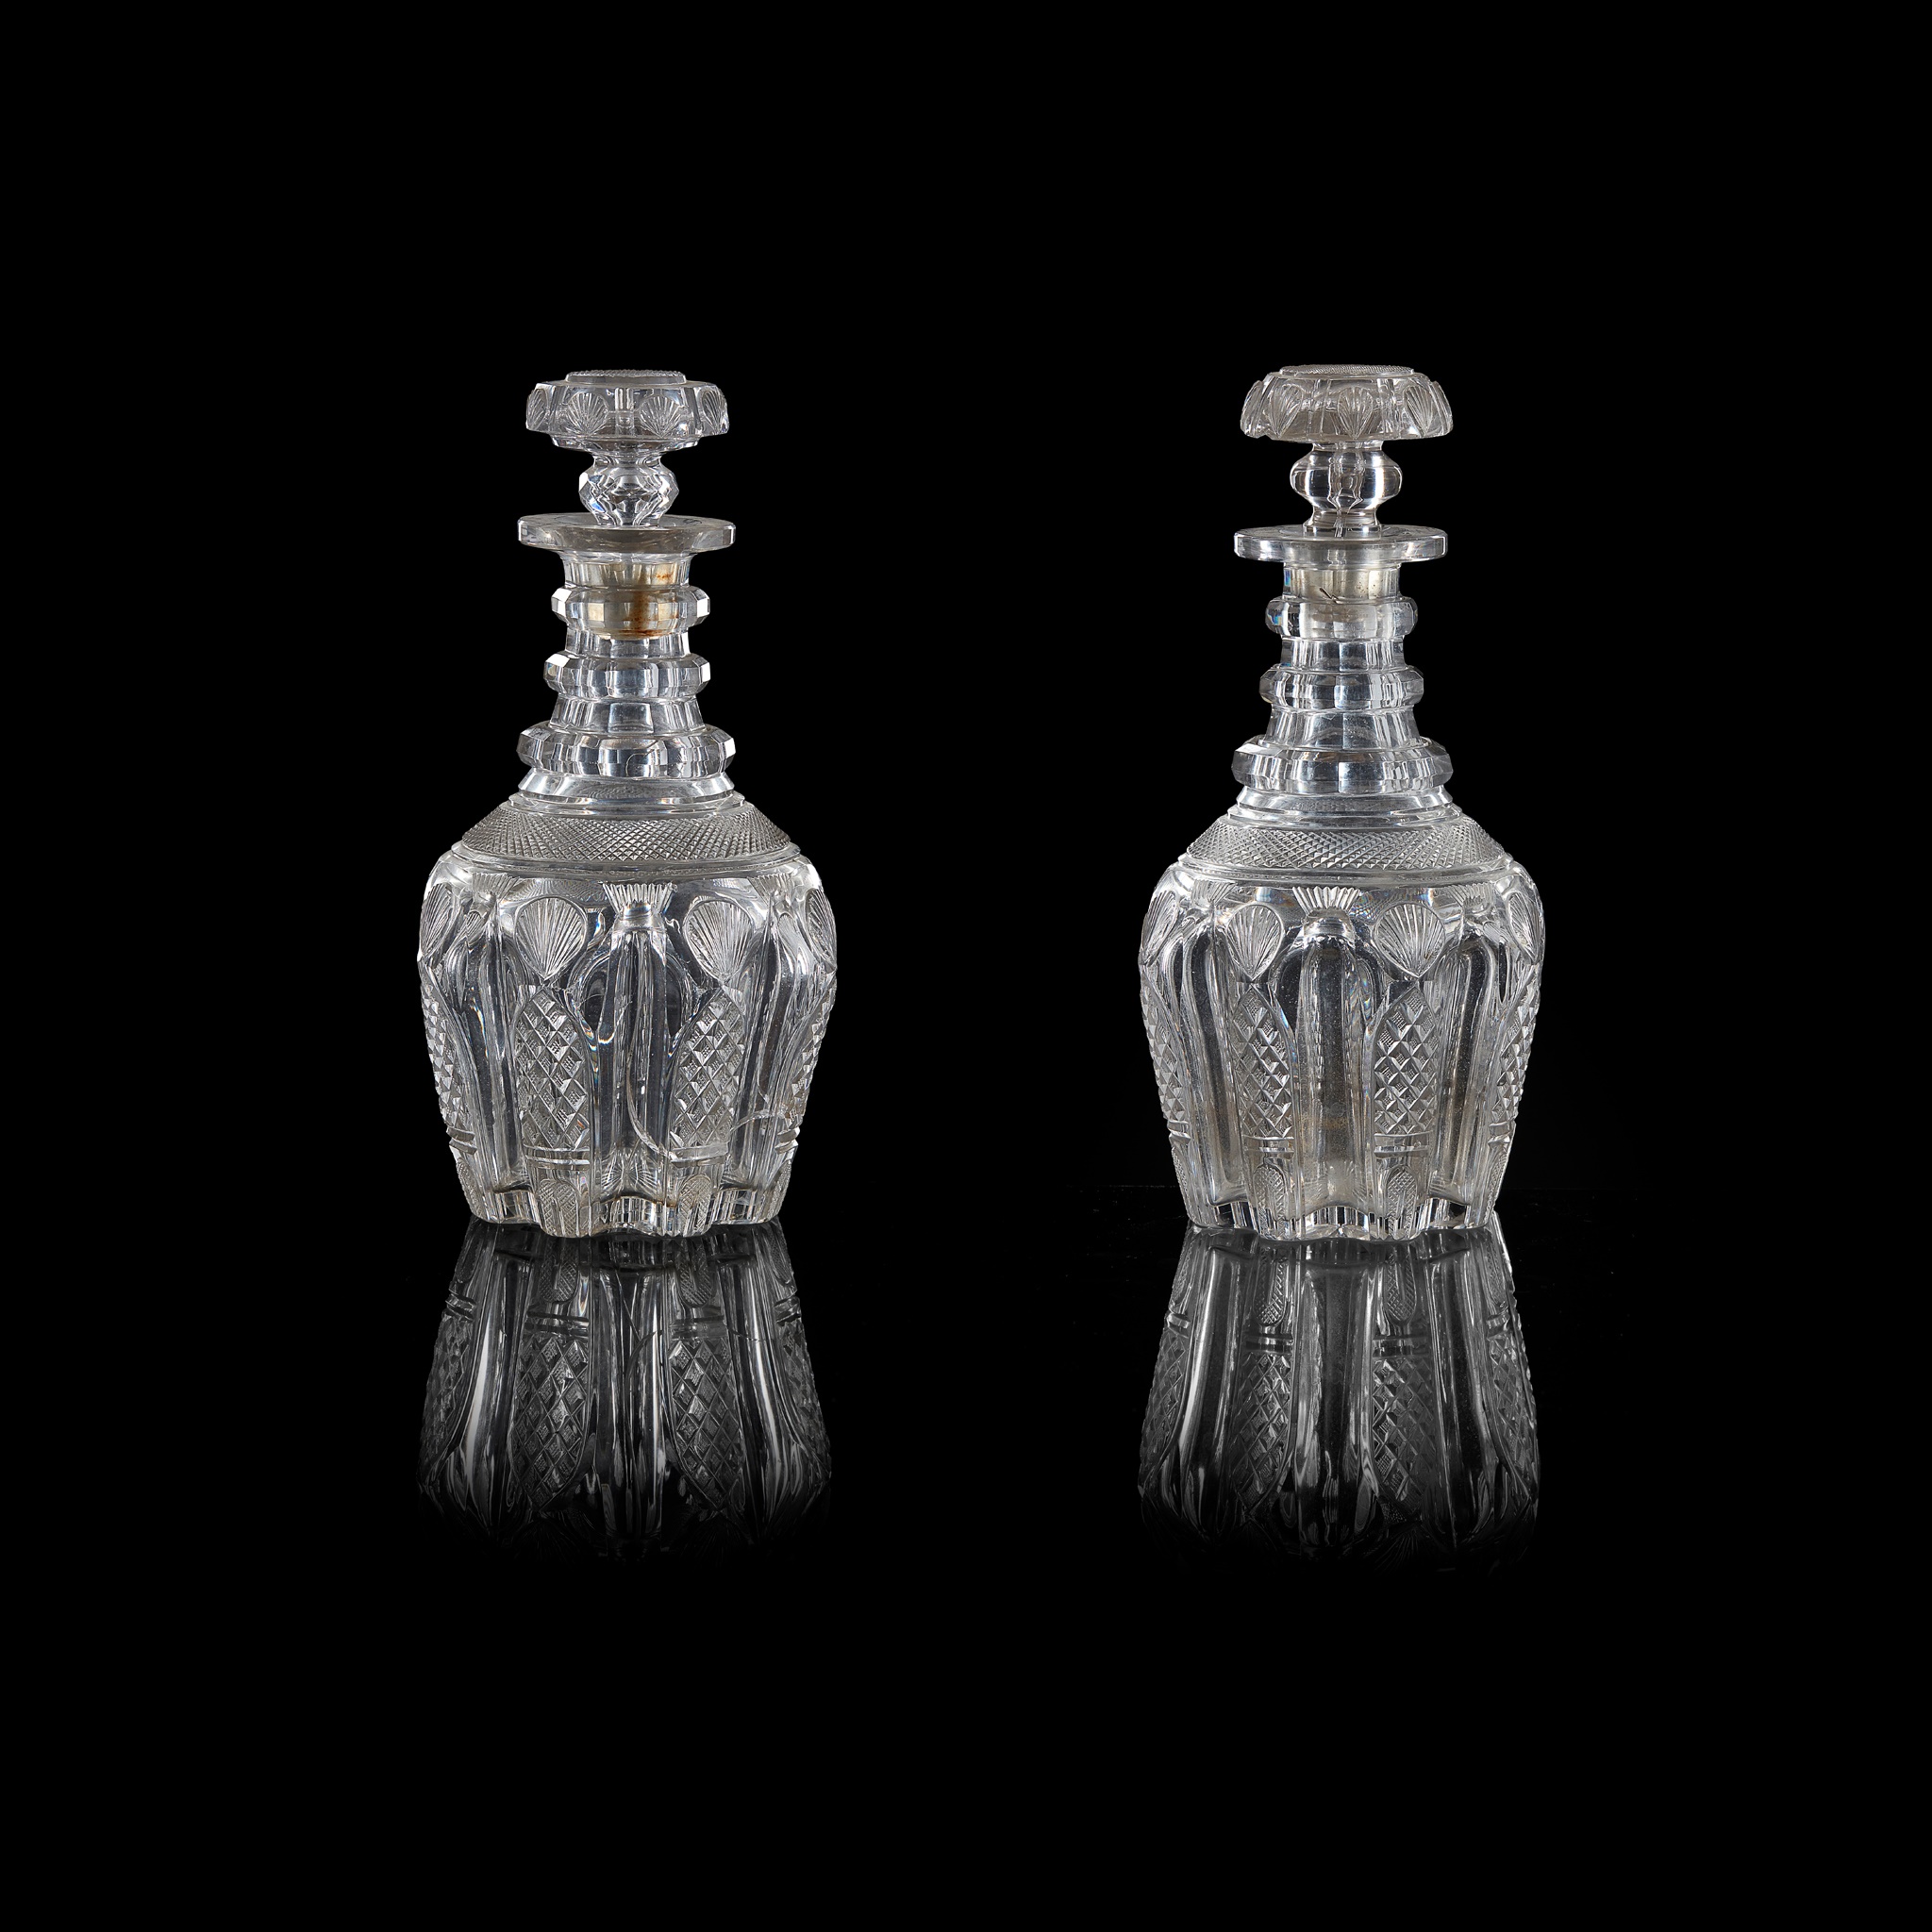 PAIR OF FULL BOTTLE TRIPLE NECK RING DECANTERS AND A MATCHING HALF BOTTLE DECANTER EARLY 19TH